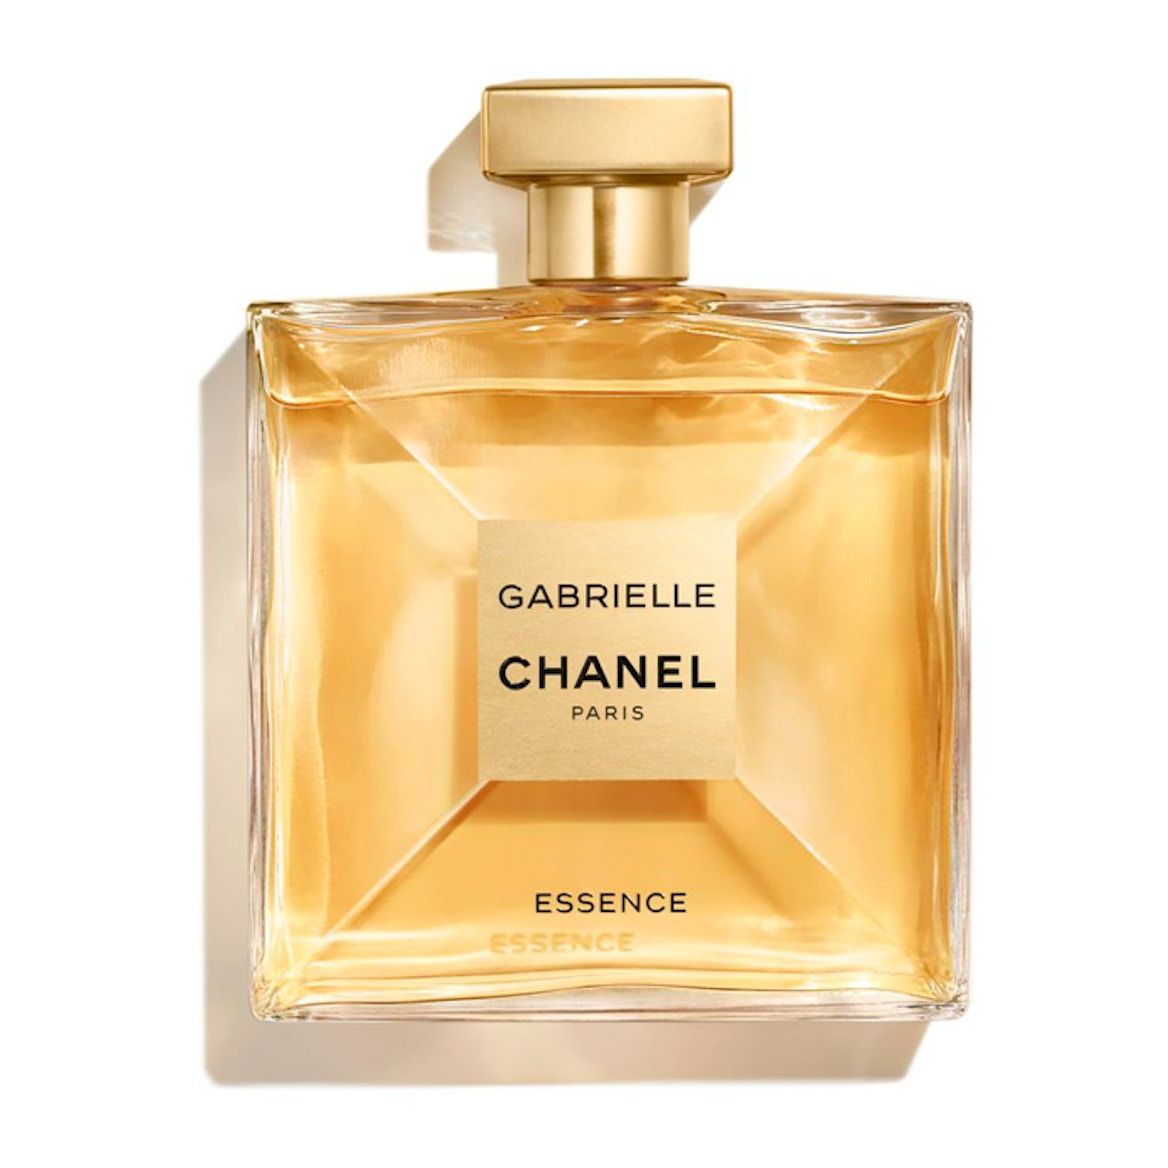 Chanel Gabrielle Chanel Essence Perfume for Women | 100ml | The Fragrance Shop | The Fragrance Shop (UK)